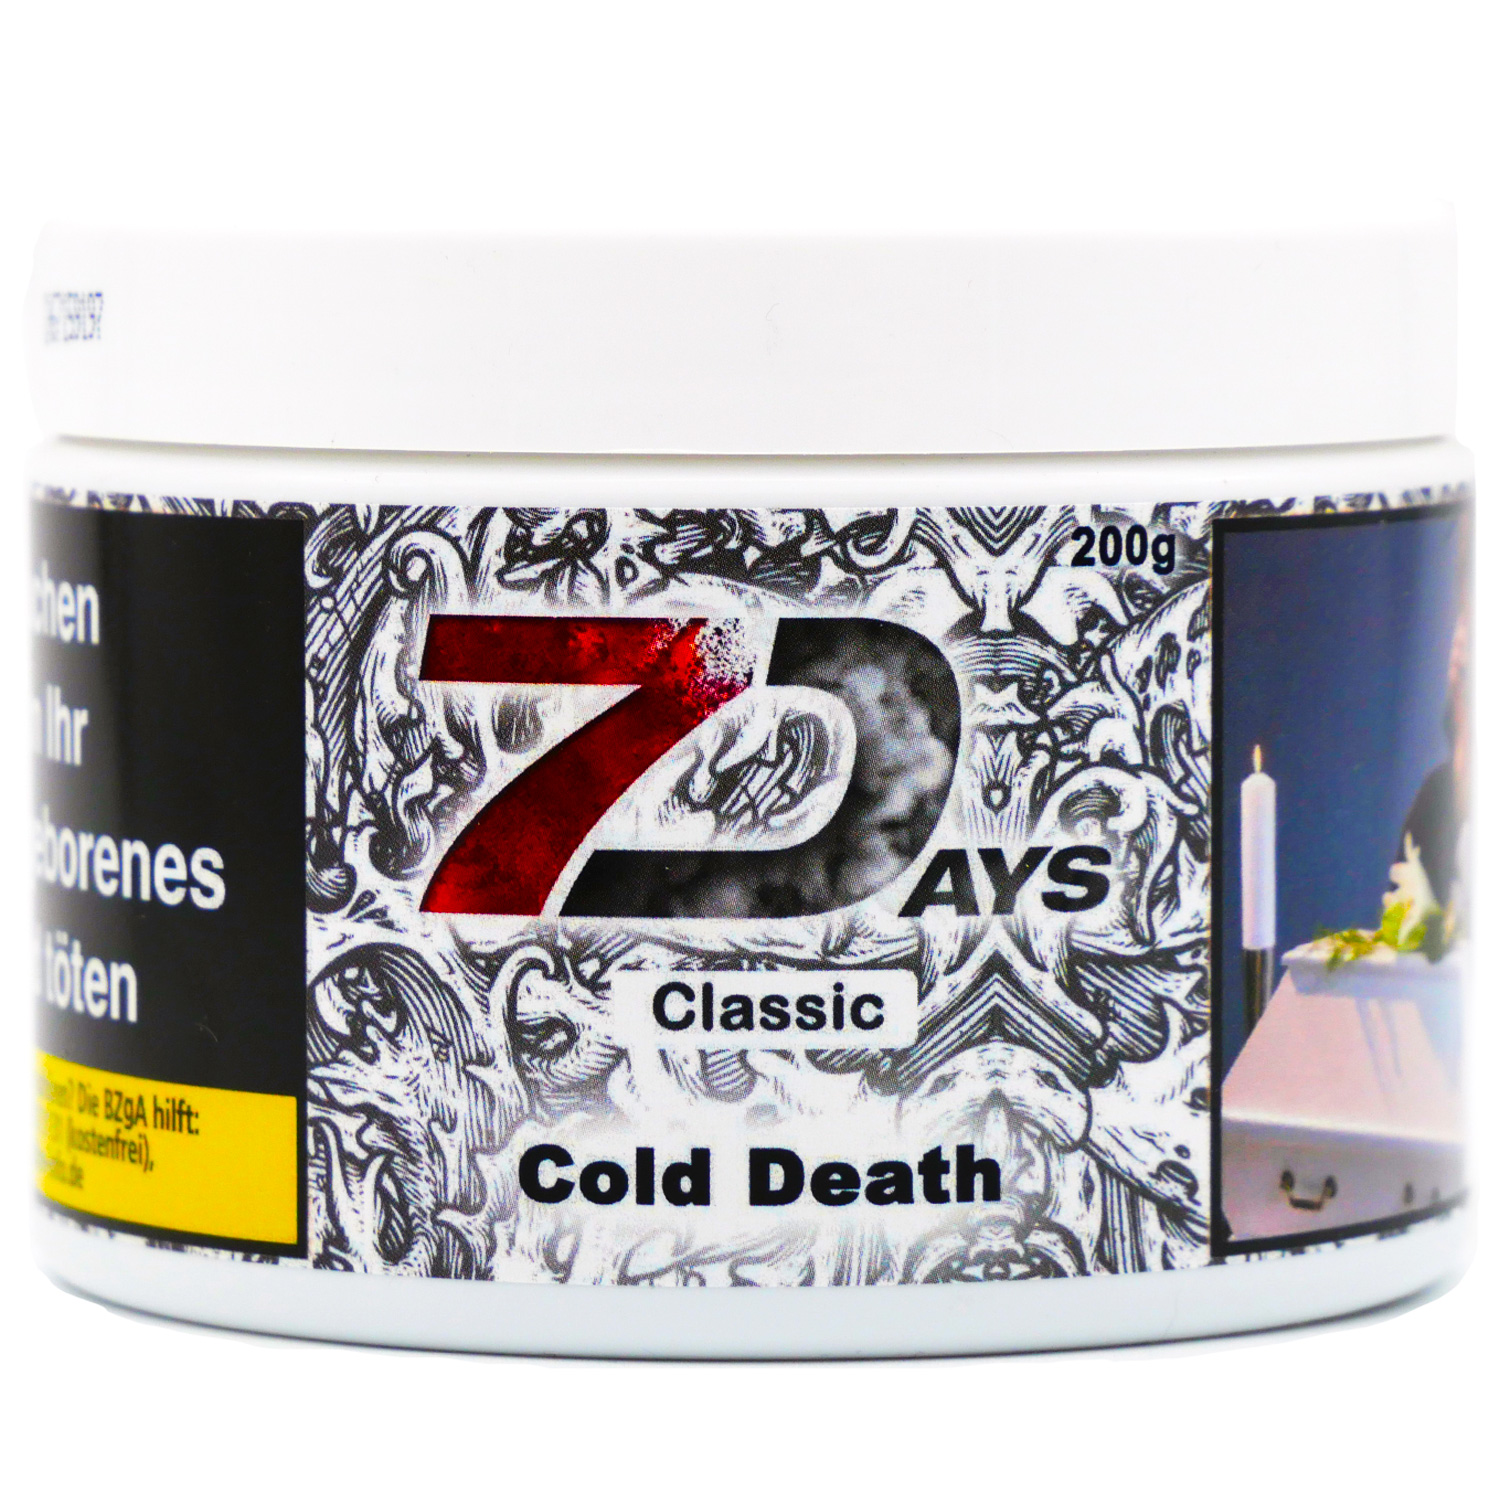 7 Days Classic | Cold Death | 200g 